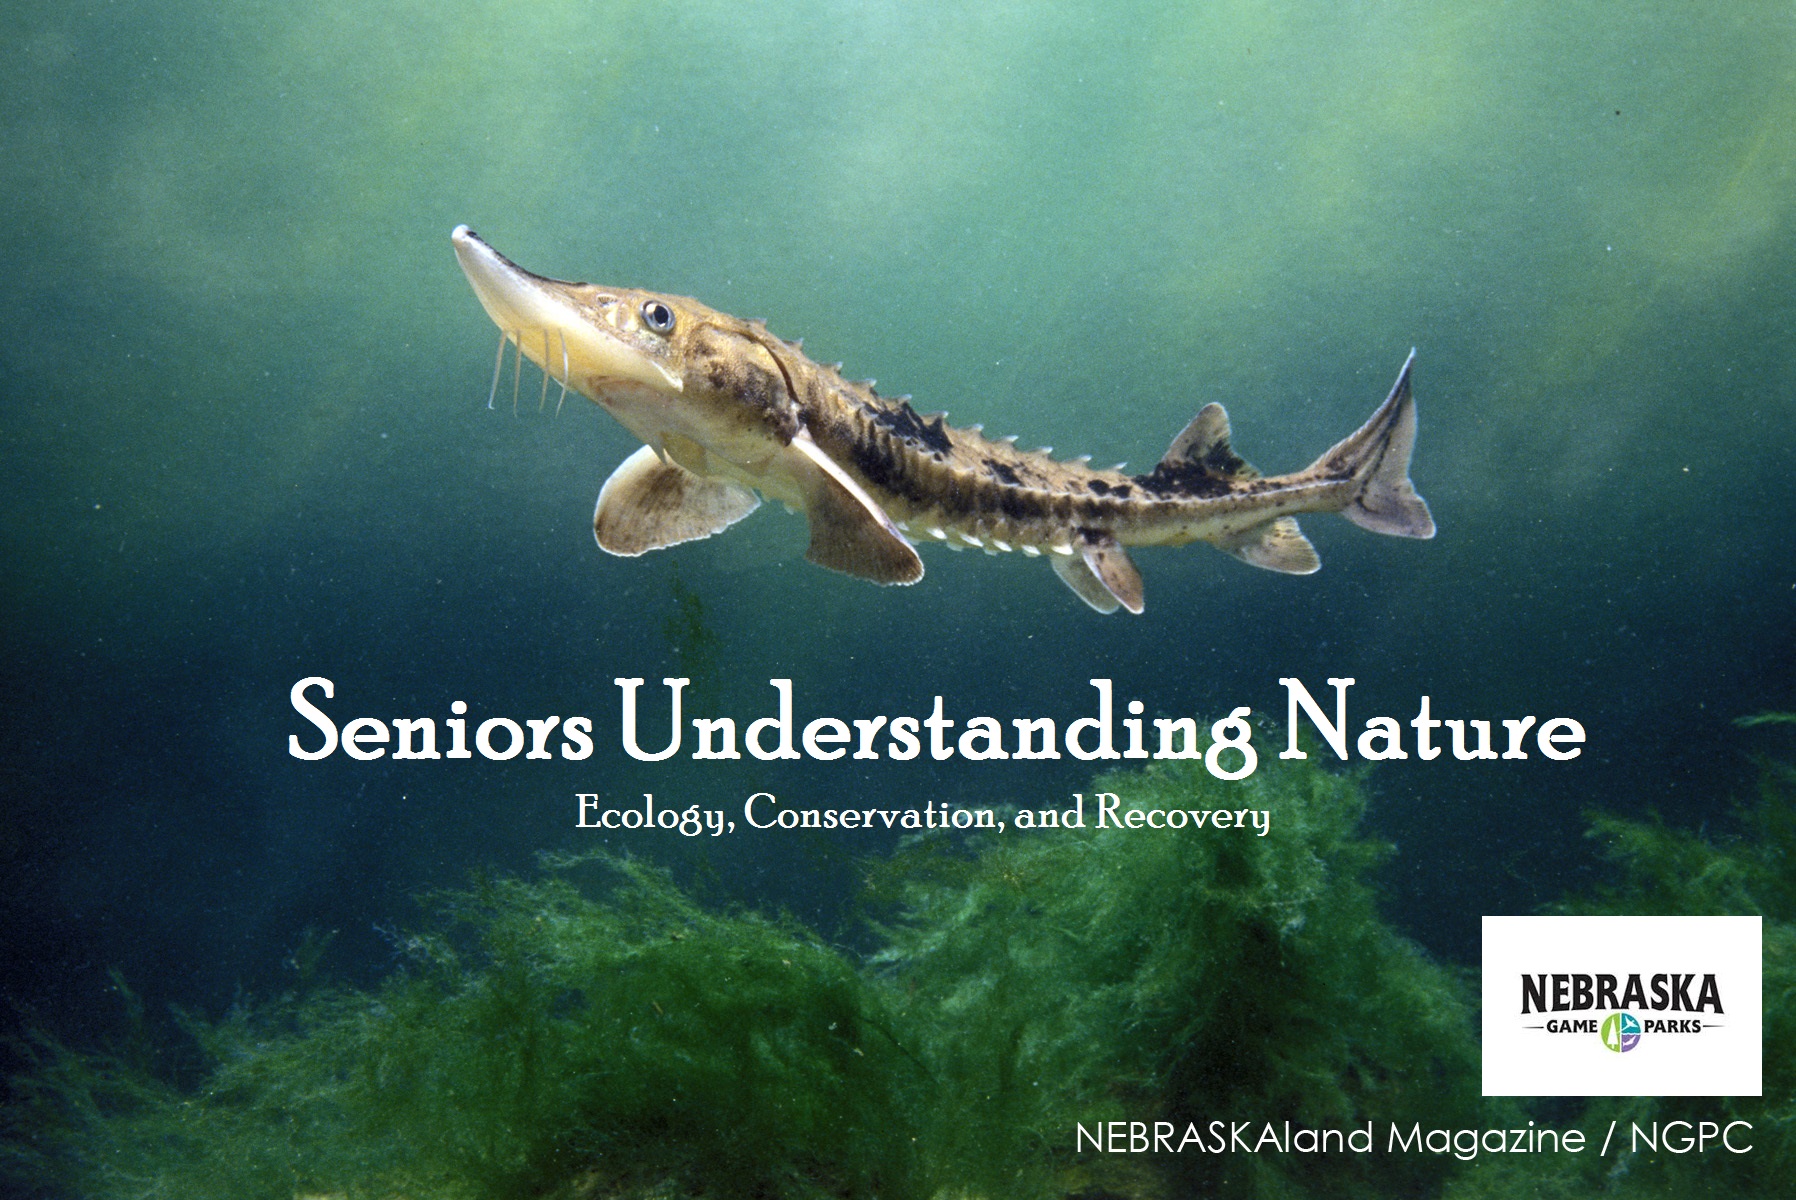 a picture of a Pallid Sturgeon underwater with the text, "Seniors Understanding Nature Ecology, Conservation, and Recovery" then farther down, "NEBRASKAland Magazine / NGPC" and the NEBRASKA GAME AND PARKS logo